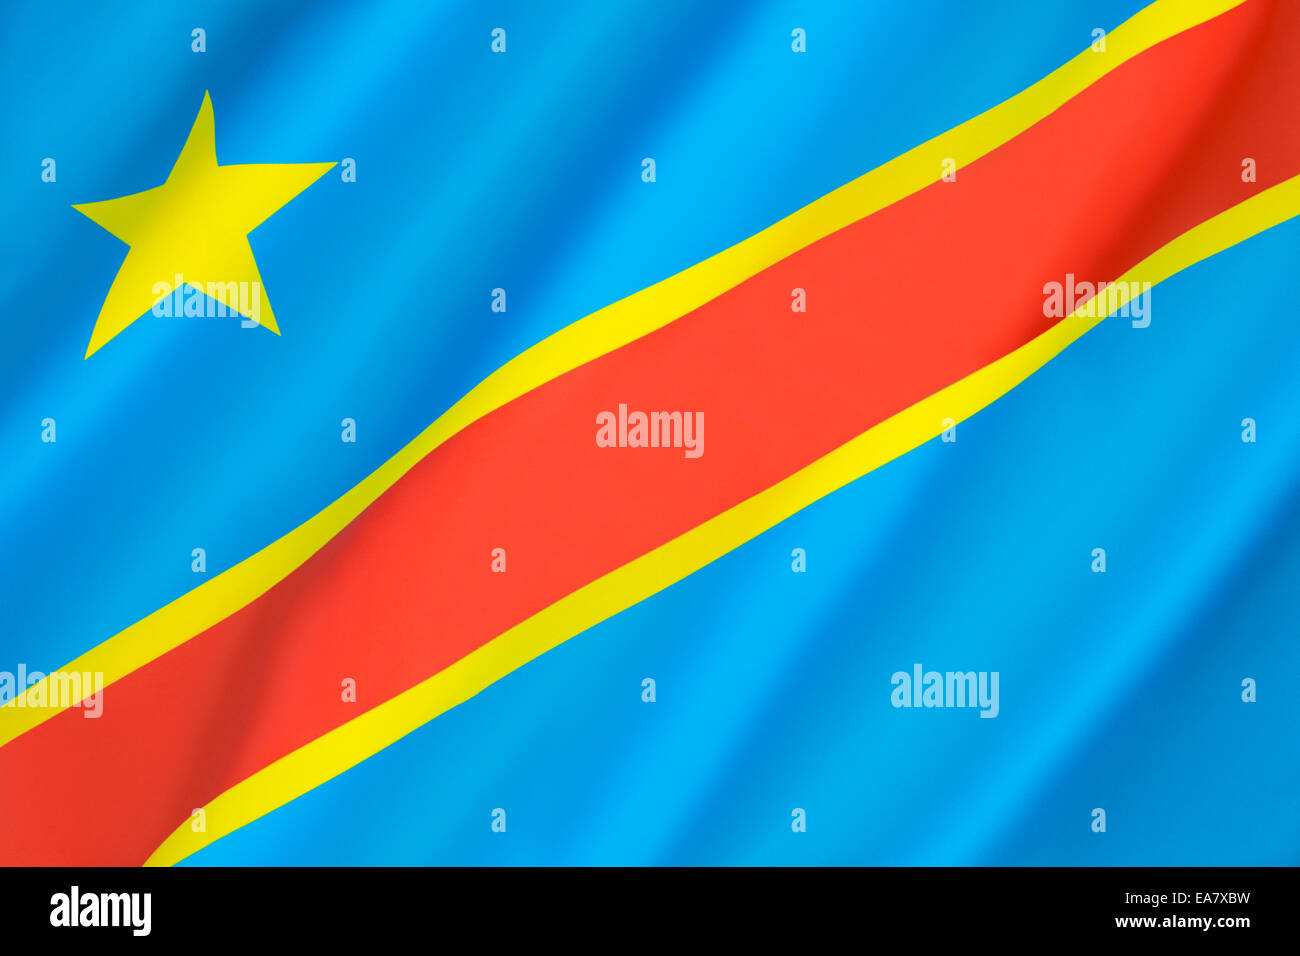 Country Democratic Republic Of The Congo Democratic Republic Of The Congo  Flag Vector Illustration Stock Illustration - Download Image Now - iStock